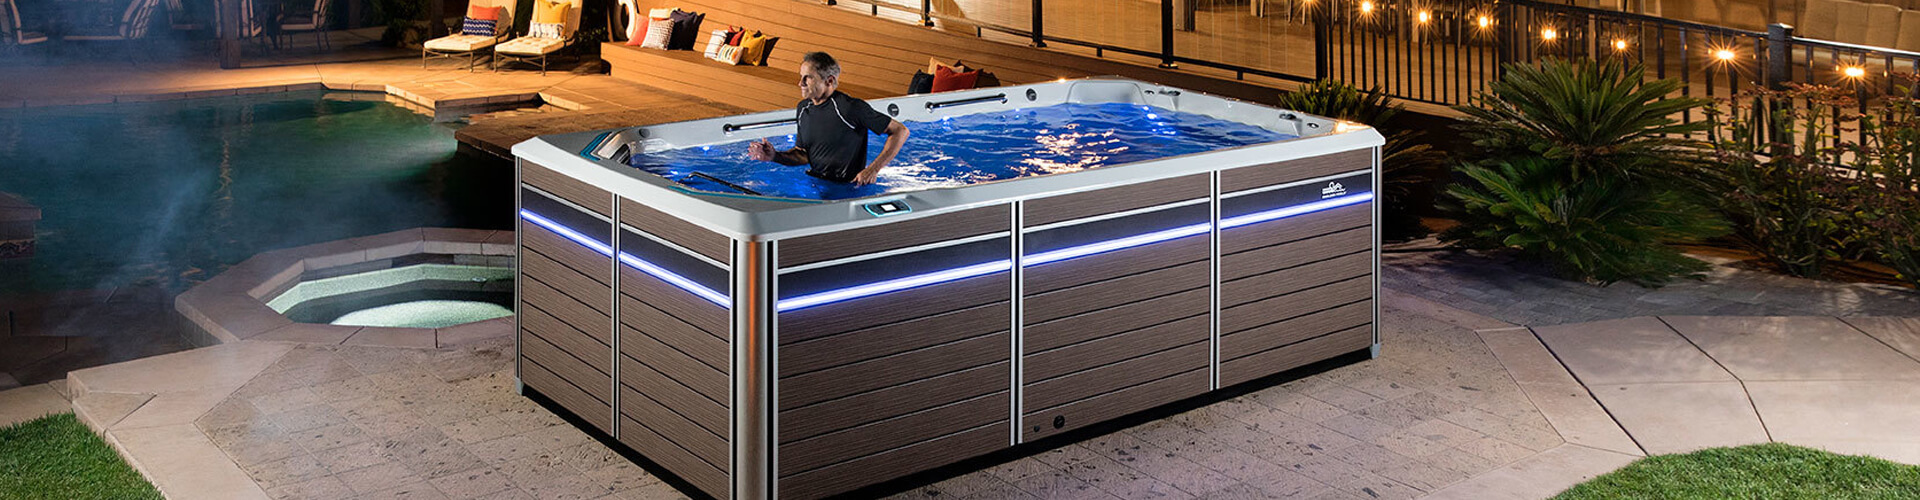 3 Reasons Why Lap Pools are So Popular with Families, Swim Spas Dealer Madison